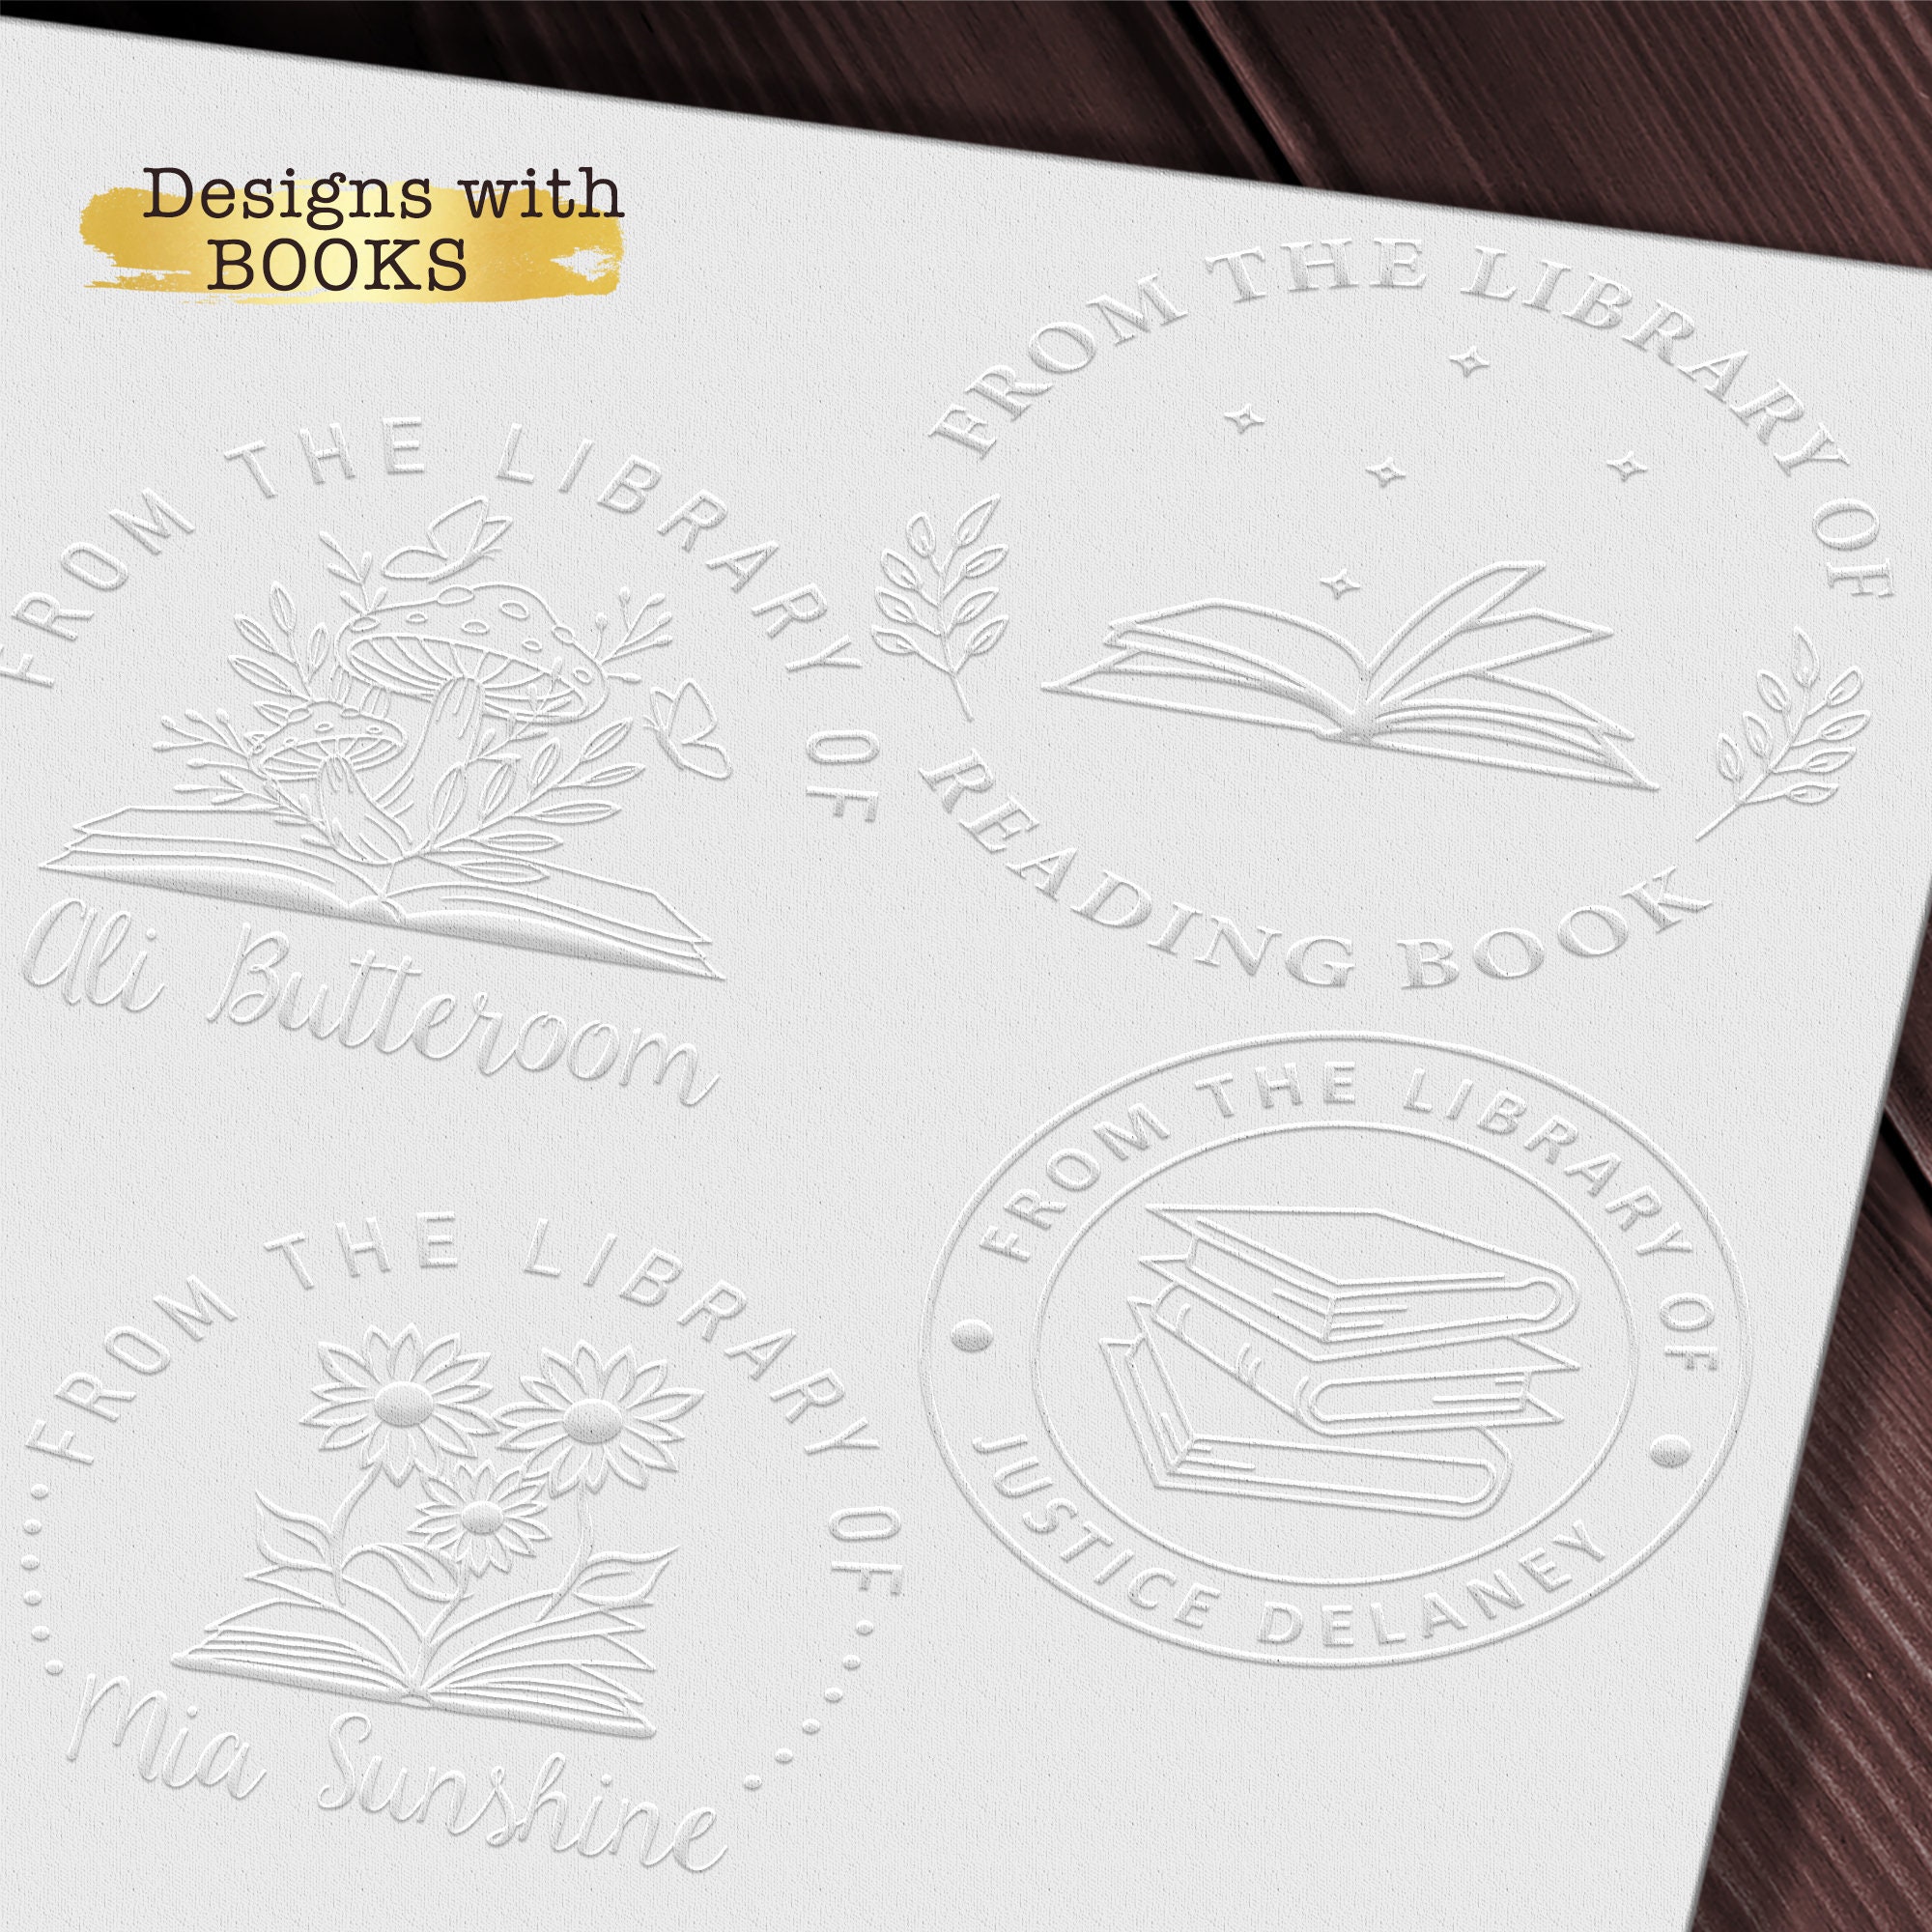 STAMPI Custom Personalized Book Embosser - Custom Name Stamp Seal with Your  Name from The Library of - The Library of Gift Ex Libris, Floral Designs 